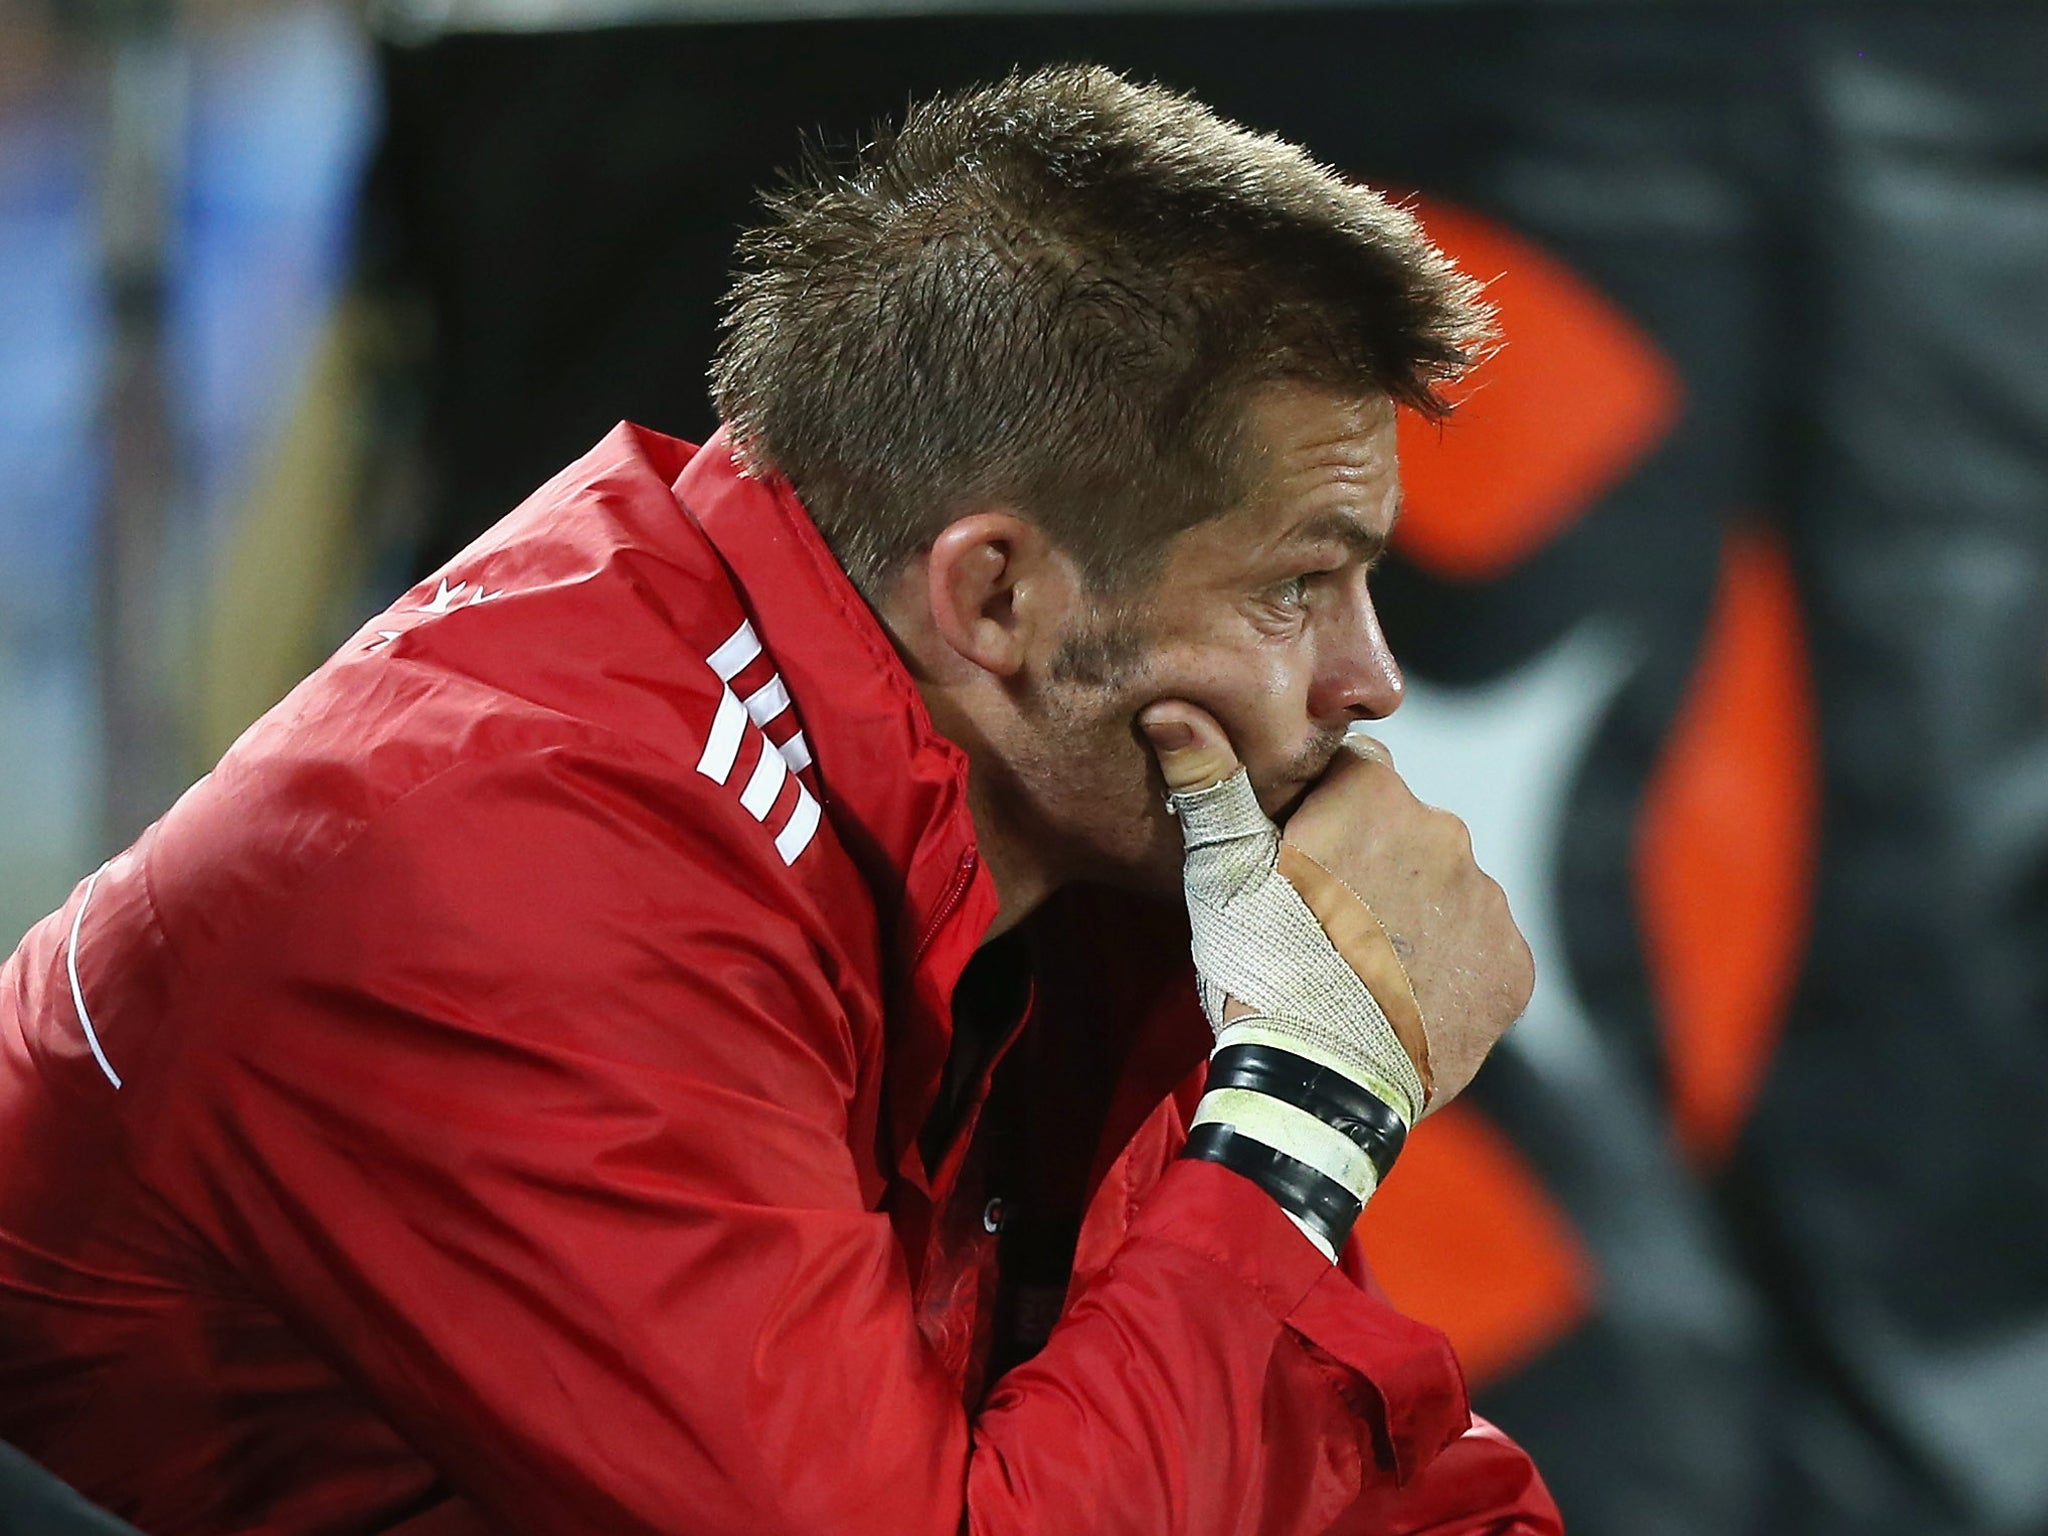 Richie McCaw has suffered a broken thumb that will keep him out for up to eight weeks